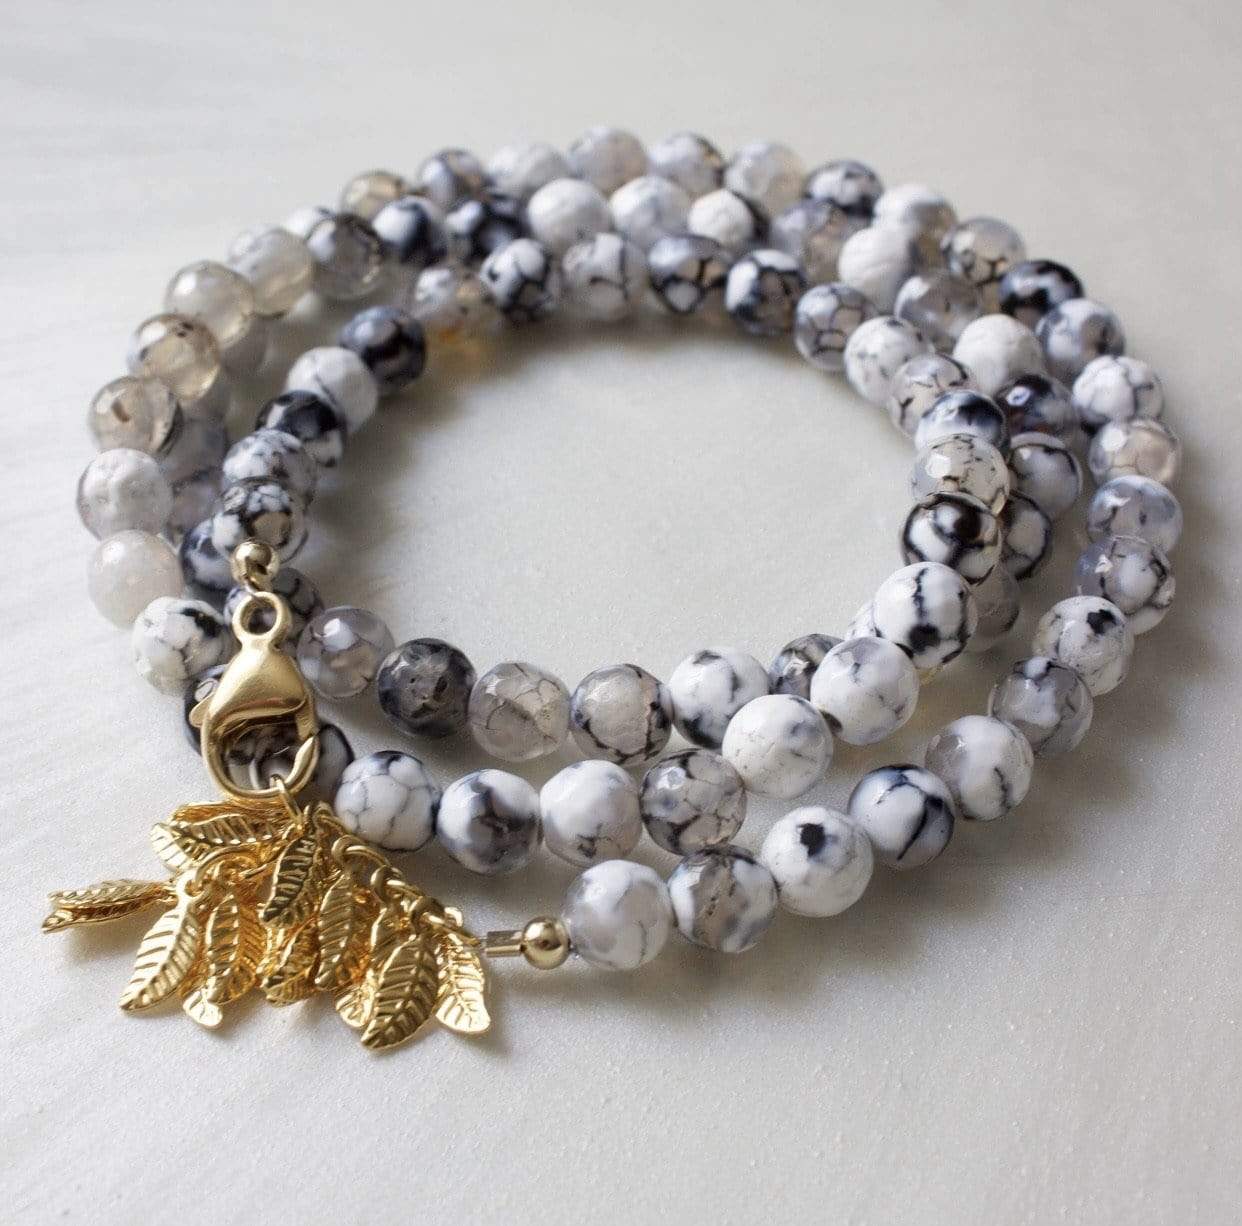 Gold Layered Speckled Agate Beaded Bracelet for Healing Stone and Spiritual